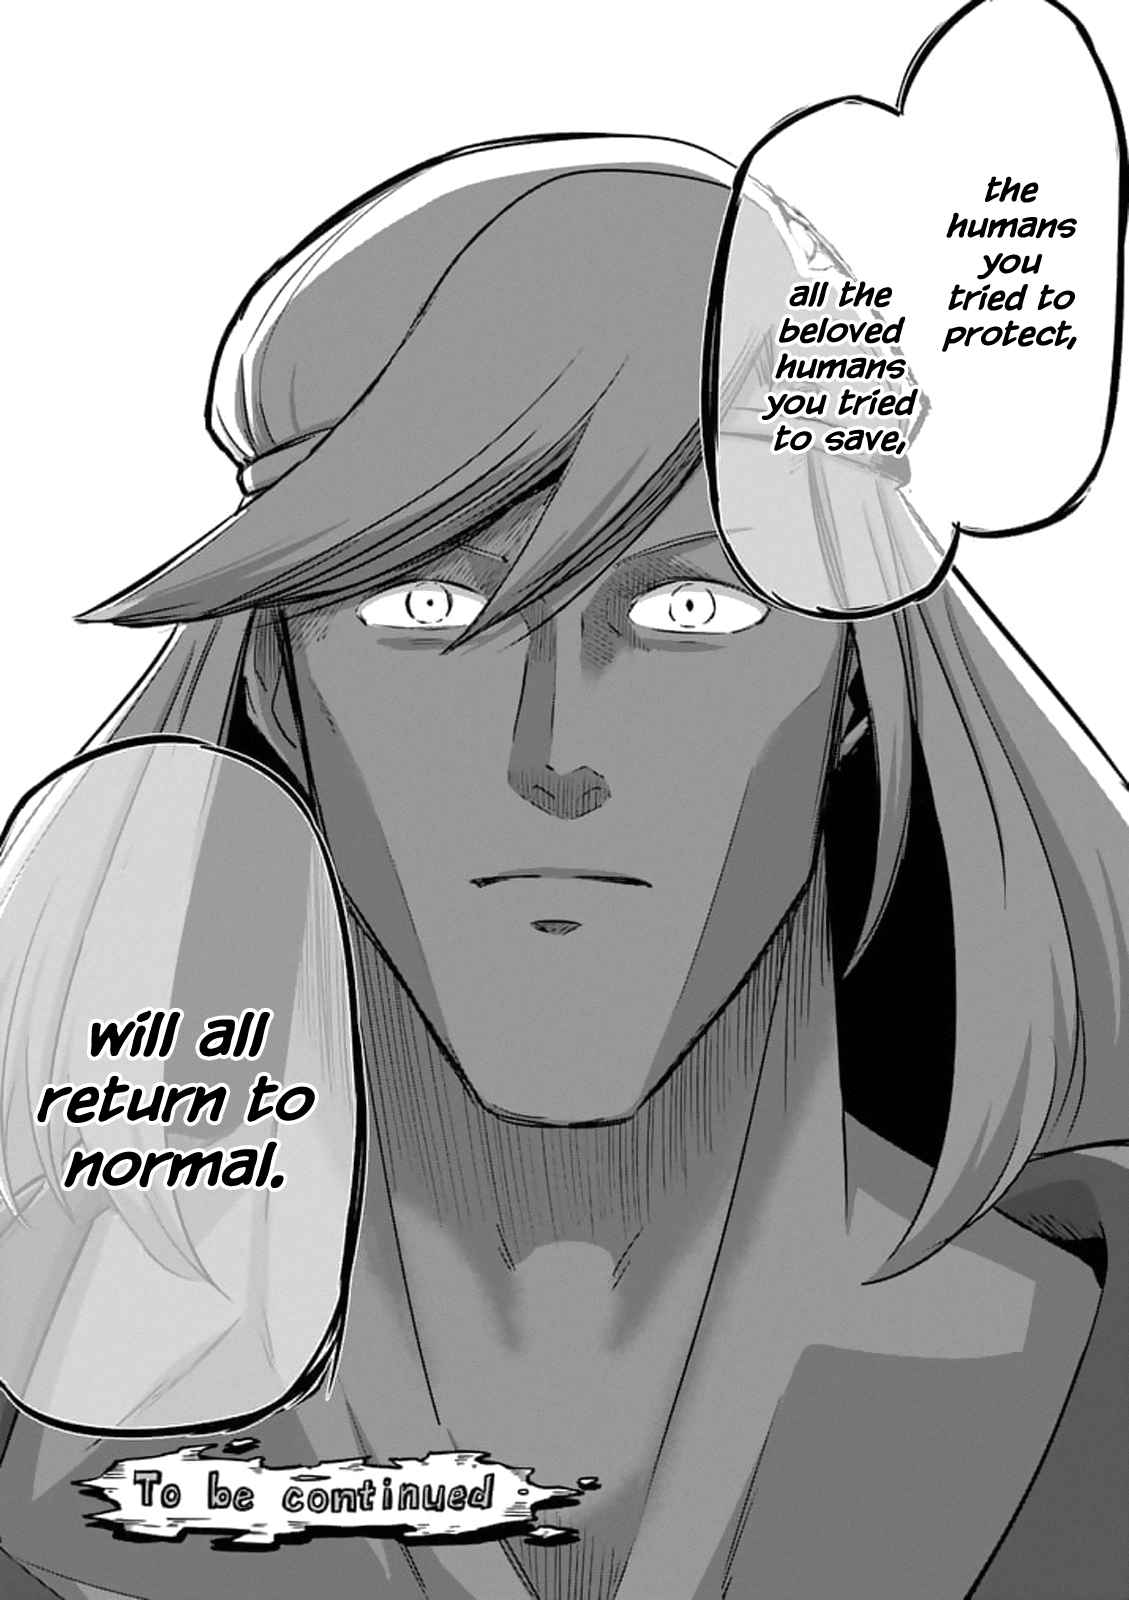 Helck Ch.89.1